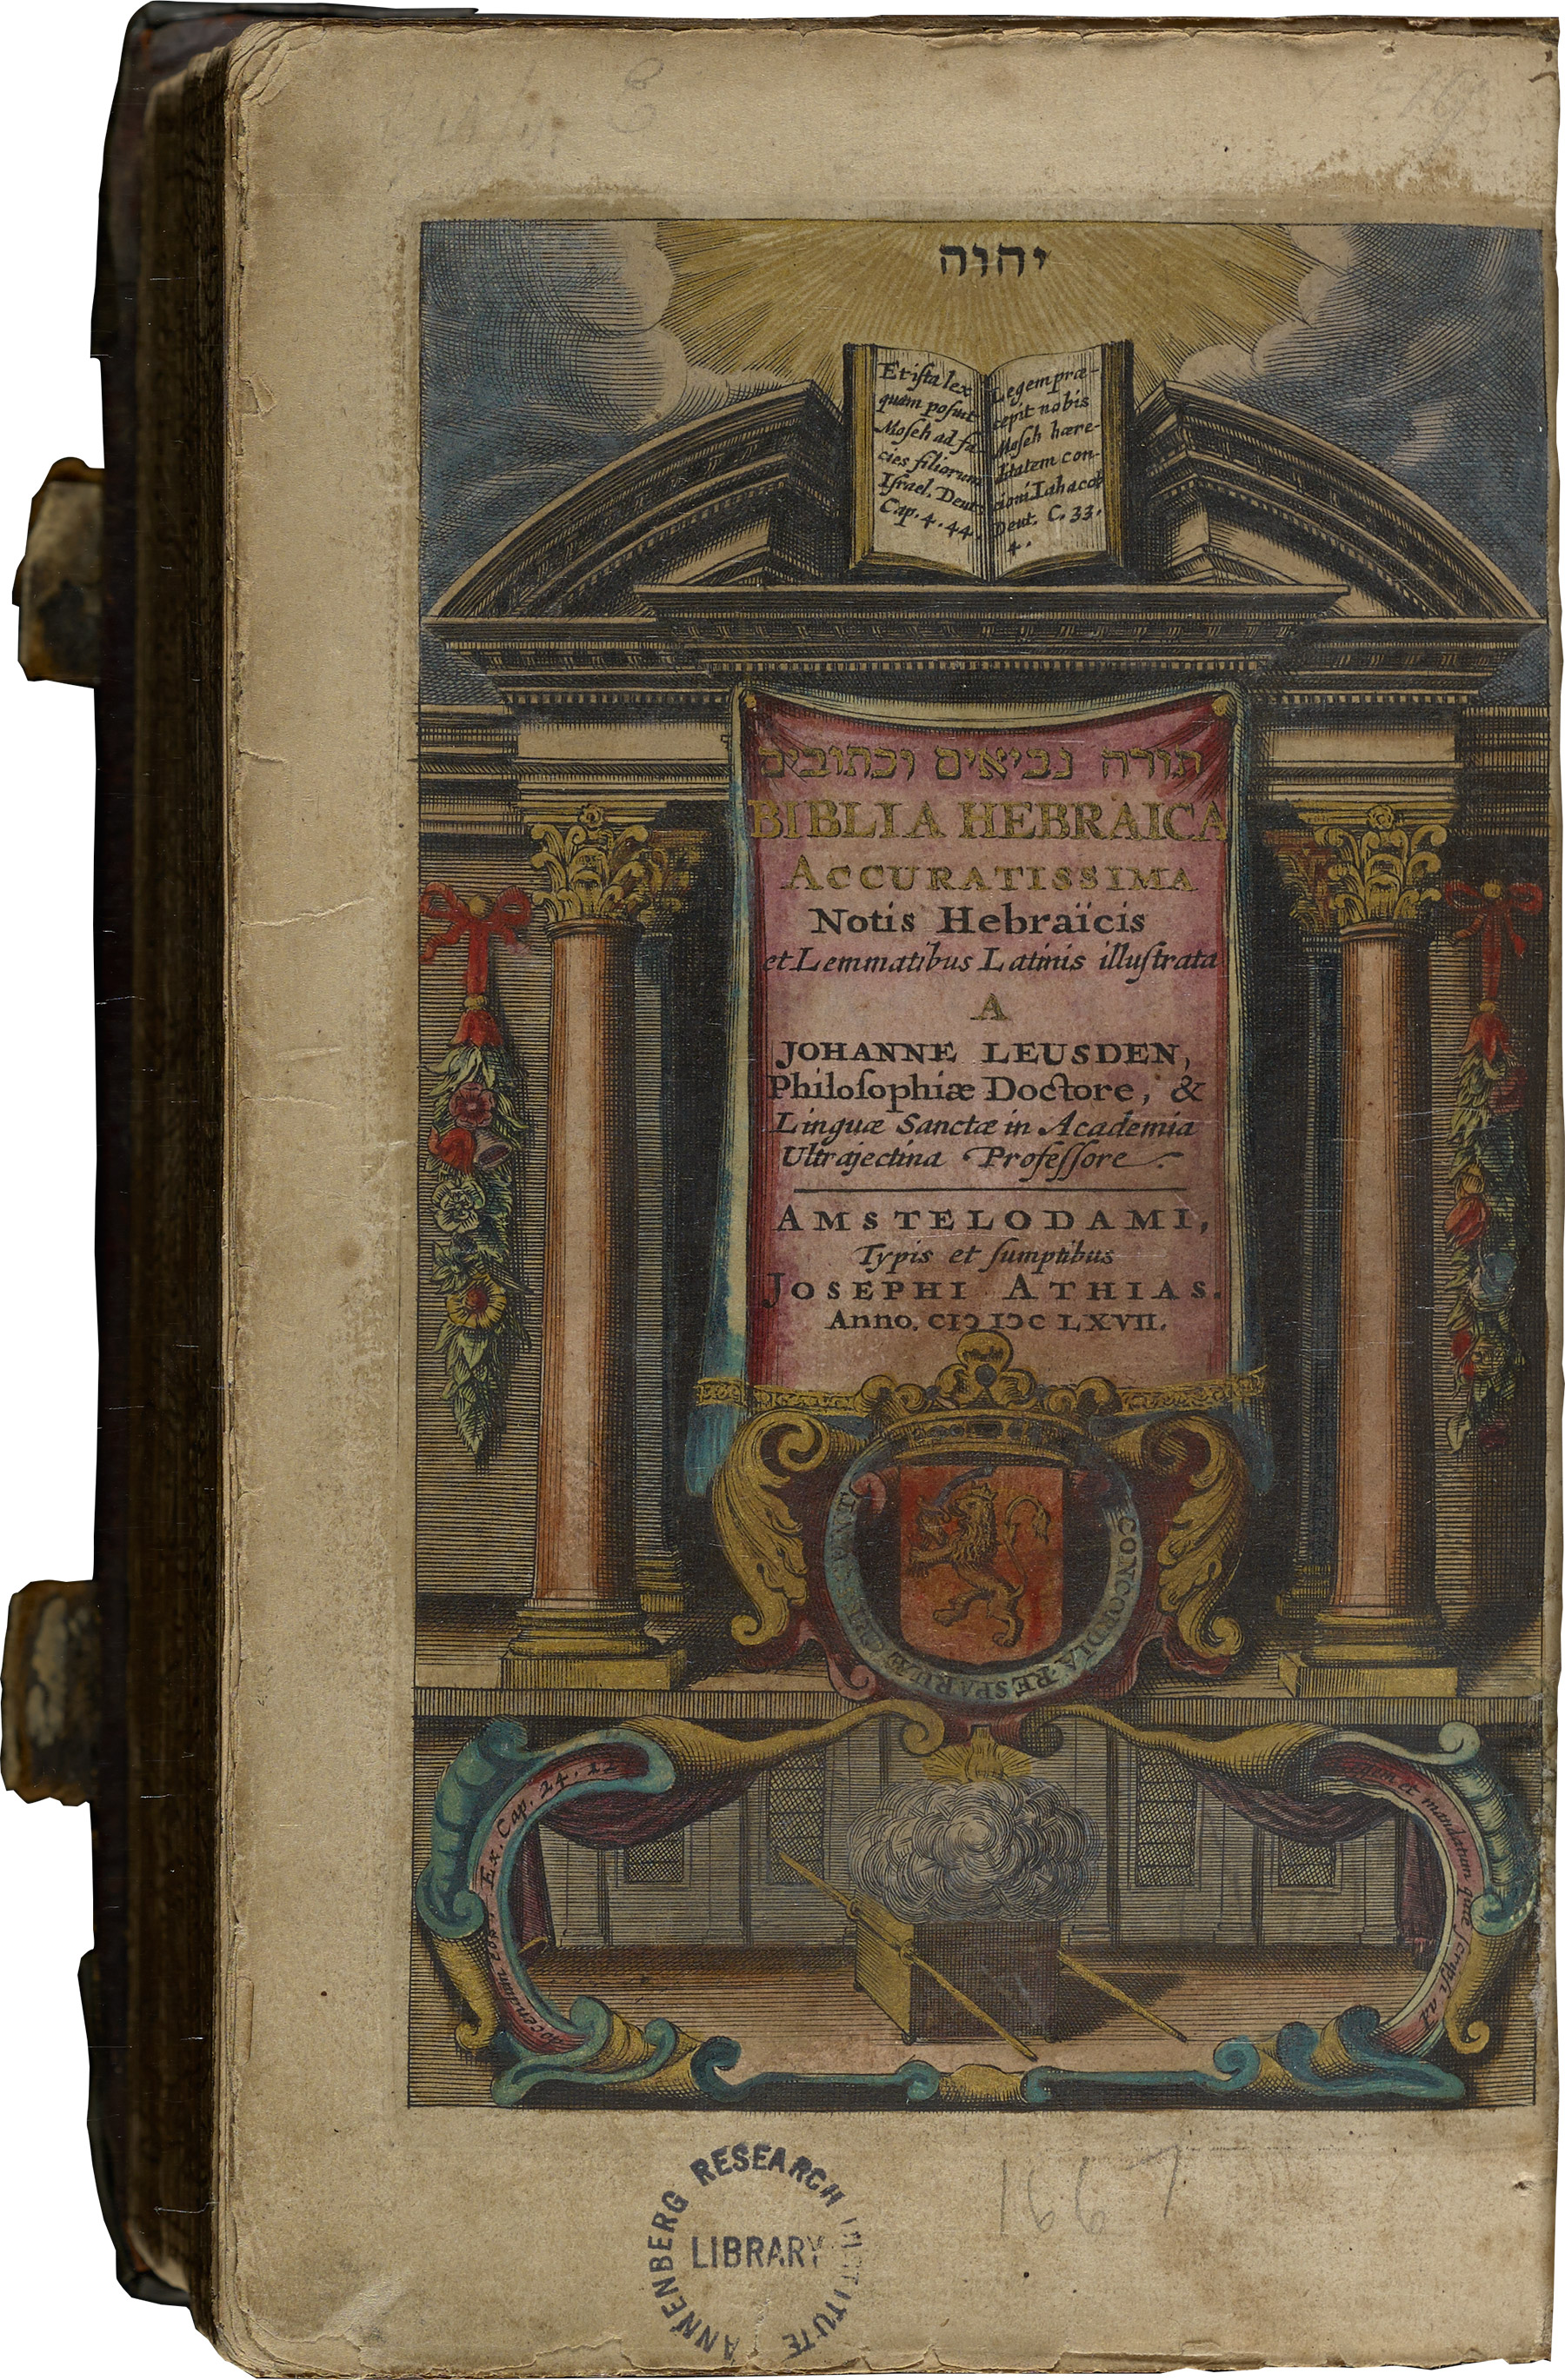 Ornate title page